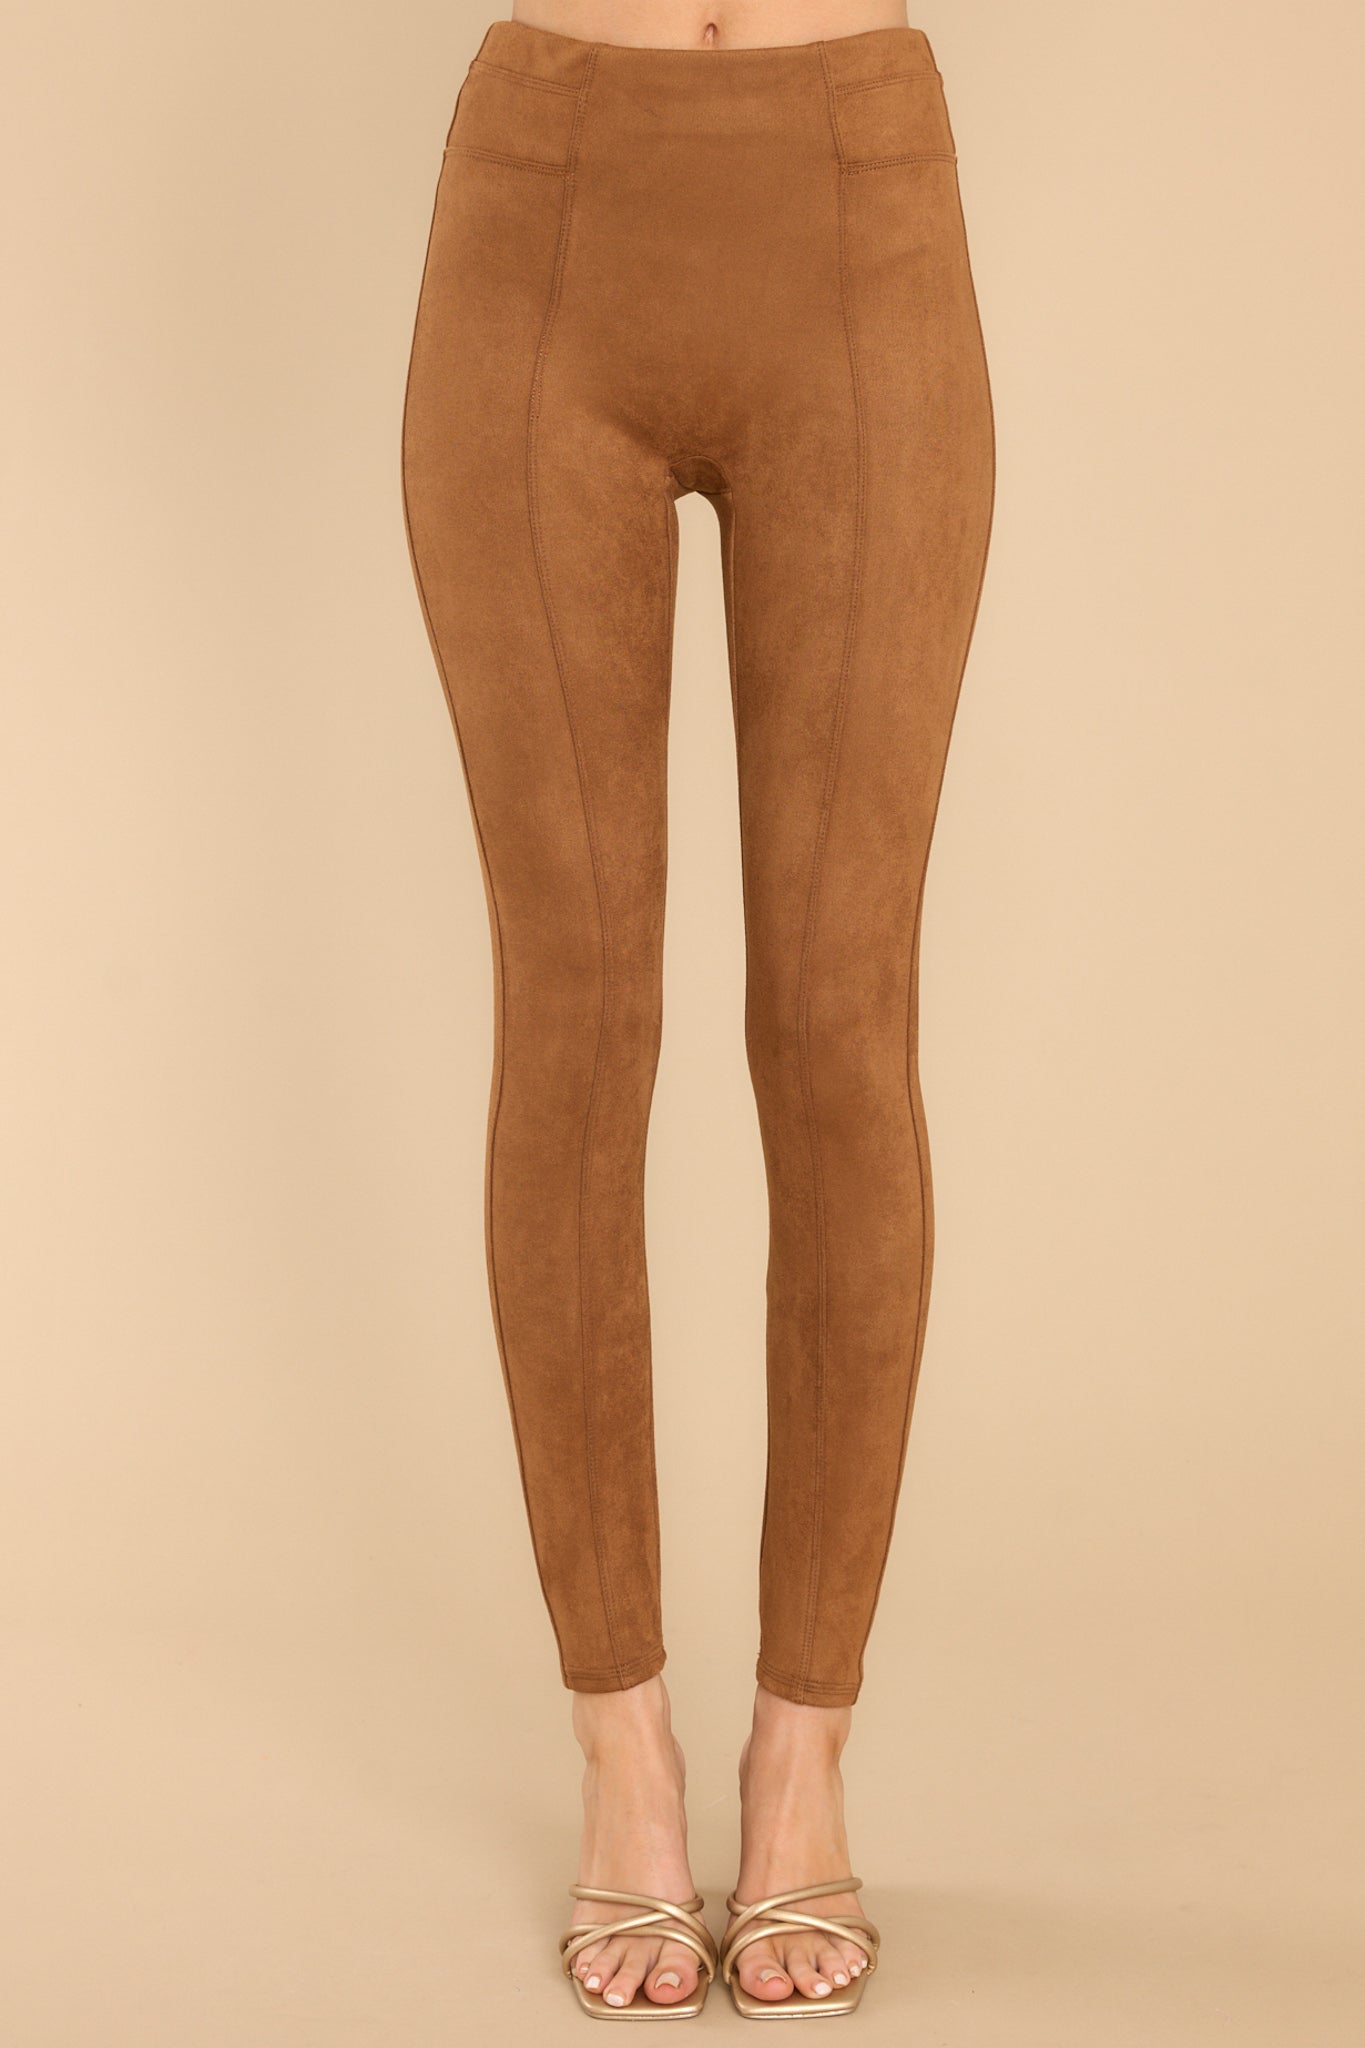 Spanx NWT Faux Suede Leggings SMALL PETITE in Rich Caramel SP PS Size  undefined - $55 New With Tags - From Lori